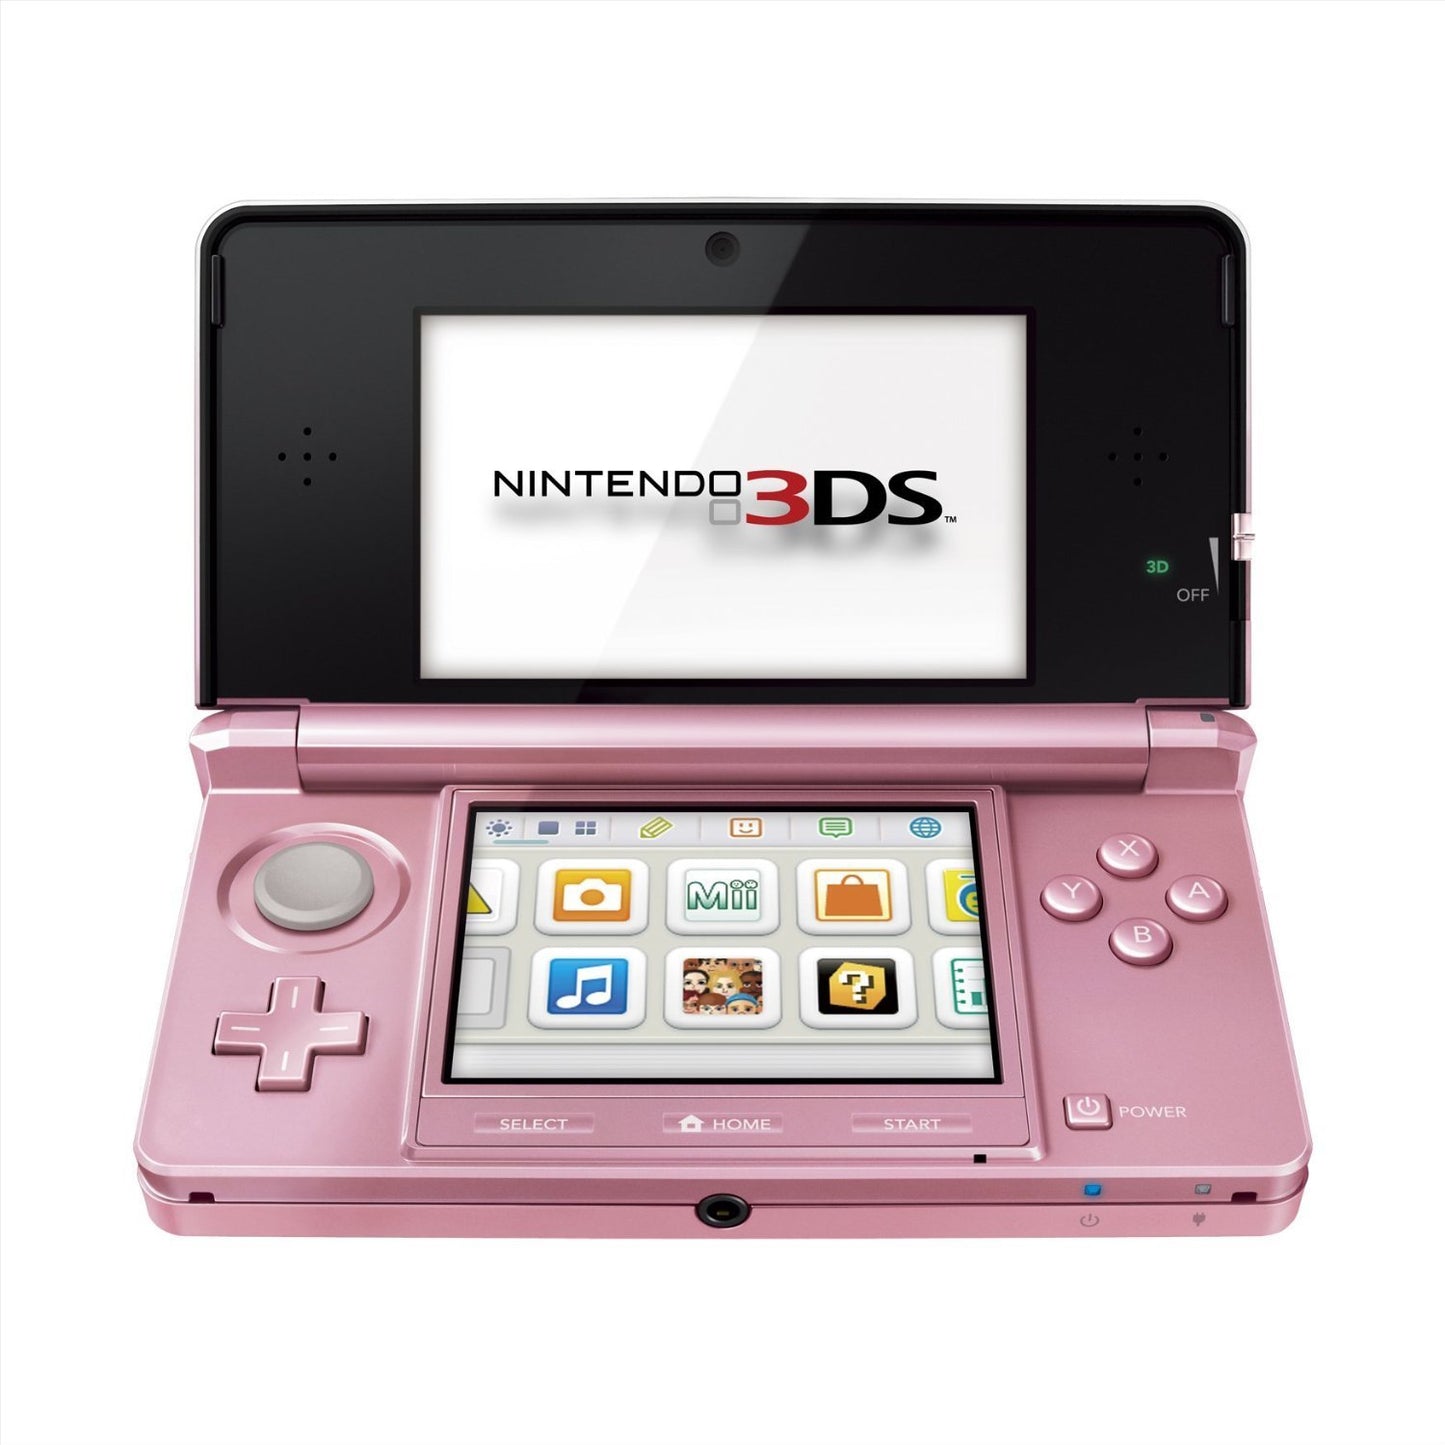 NINTENDO 3DS - PEARL PINK (used)